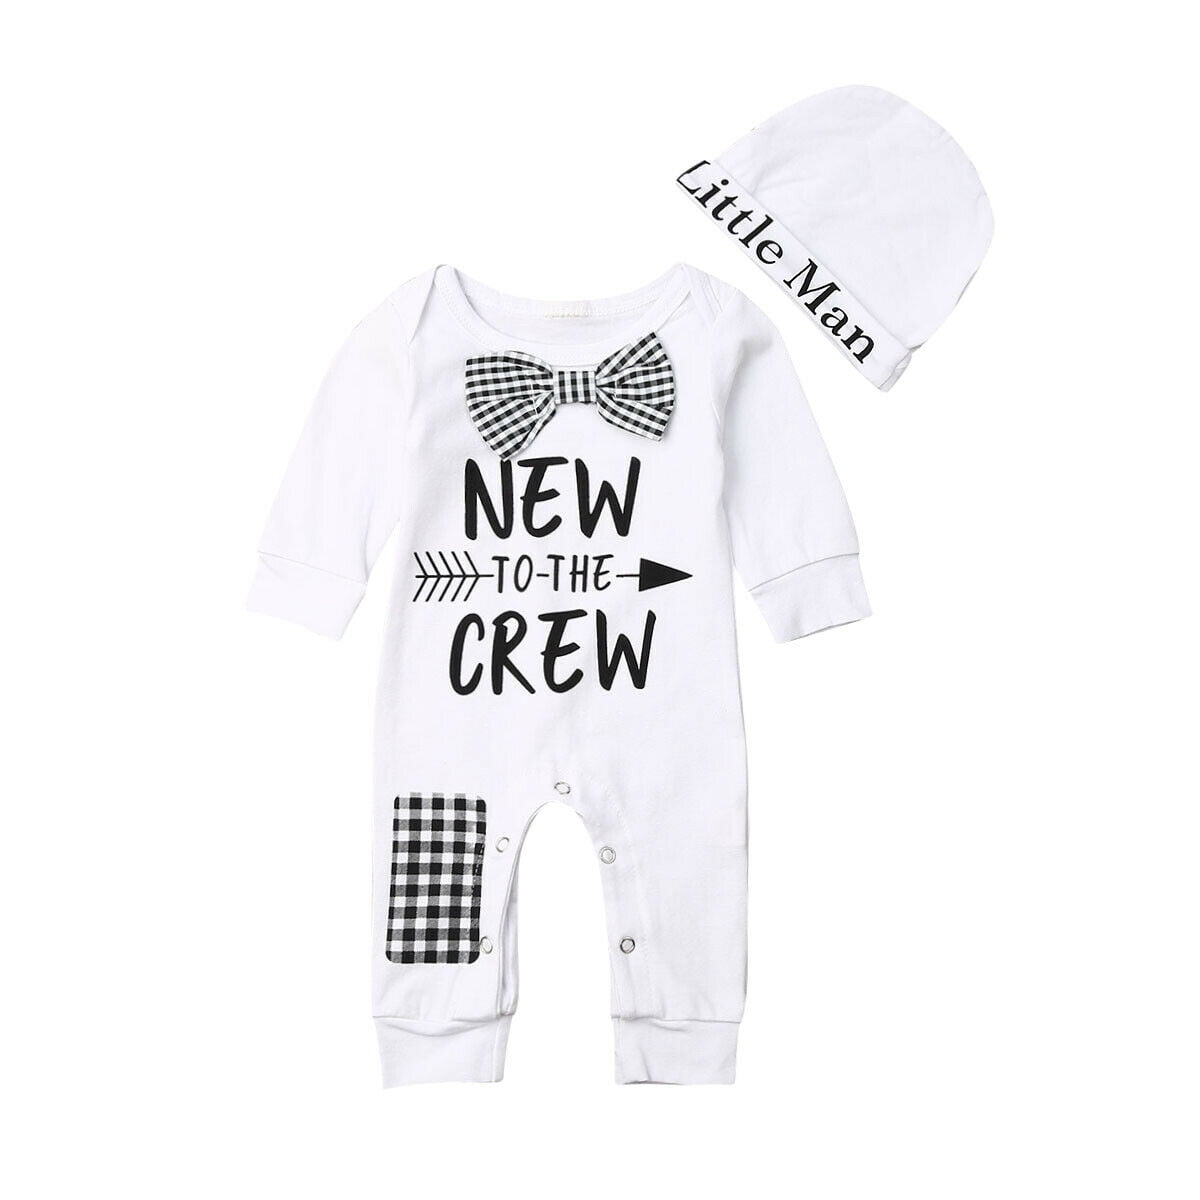 Newborn outfit baby hospital clothes cotton white bodysuit hat and blanket 